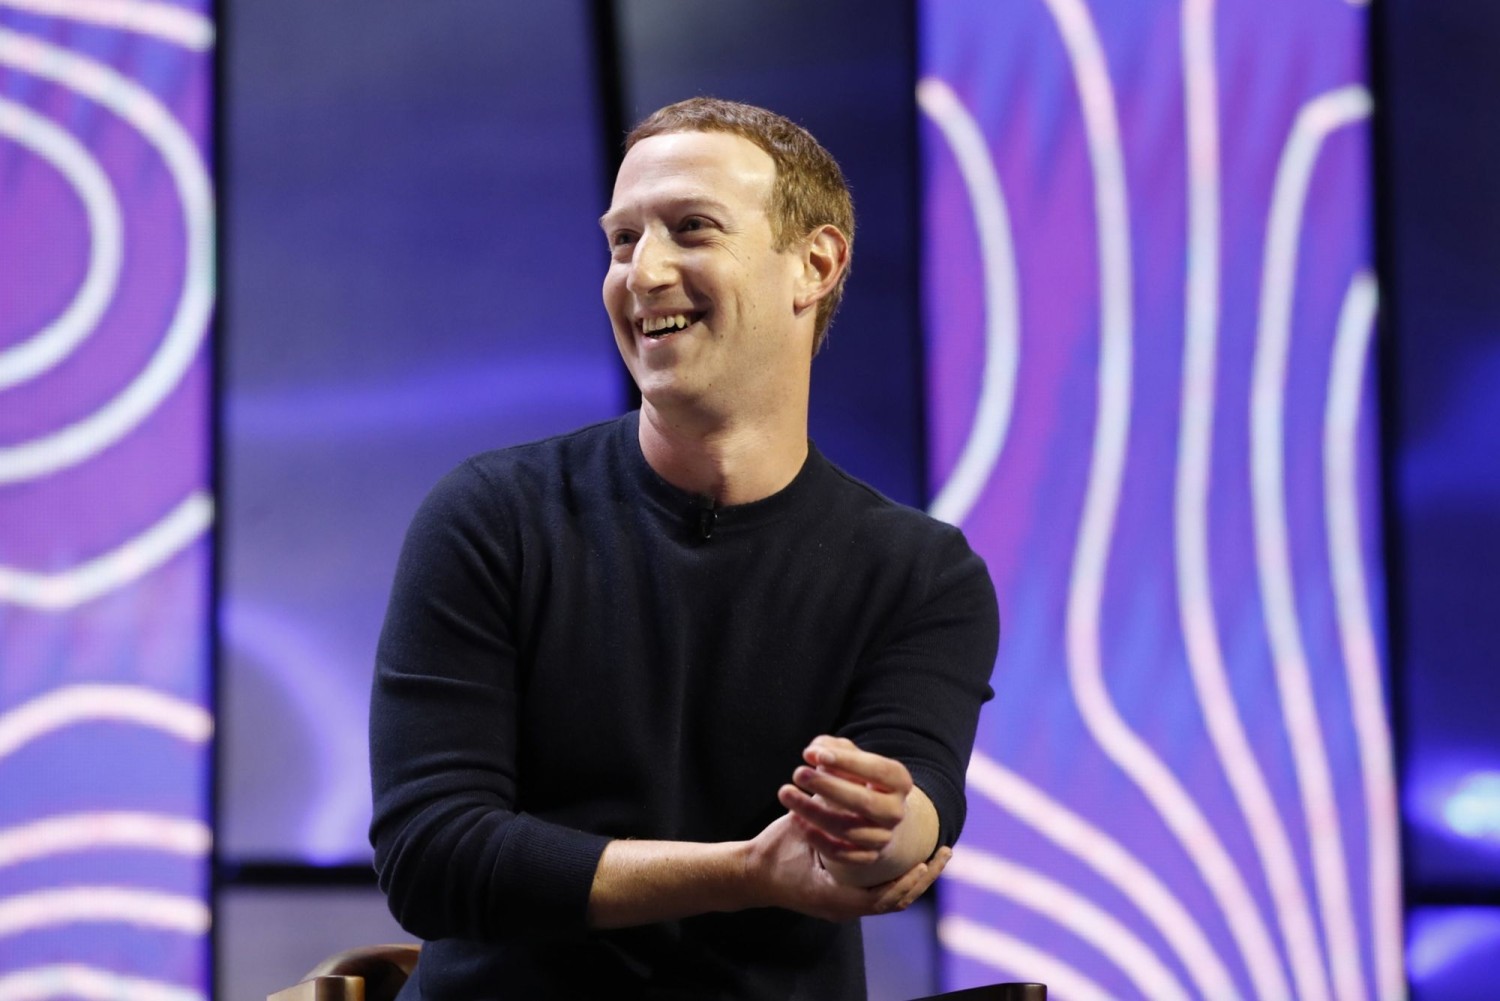 Mark Zuckerberg, chief executive officer and founder of Facebook parent Meta, has taken over more control over the company’s AI efforts. GEORGE FREY/BLOOMBERG NEWS